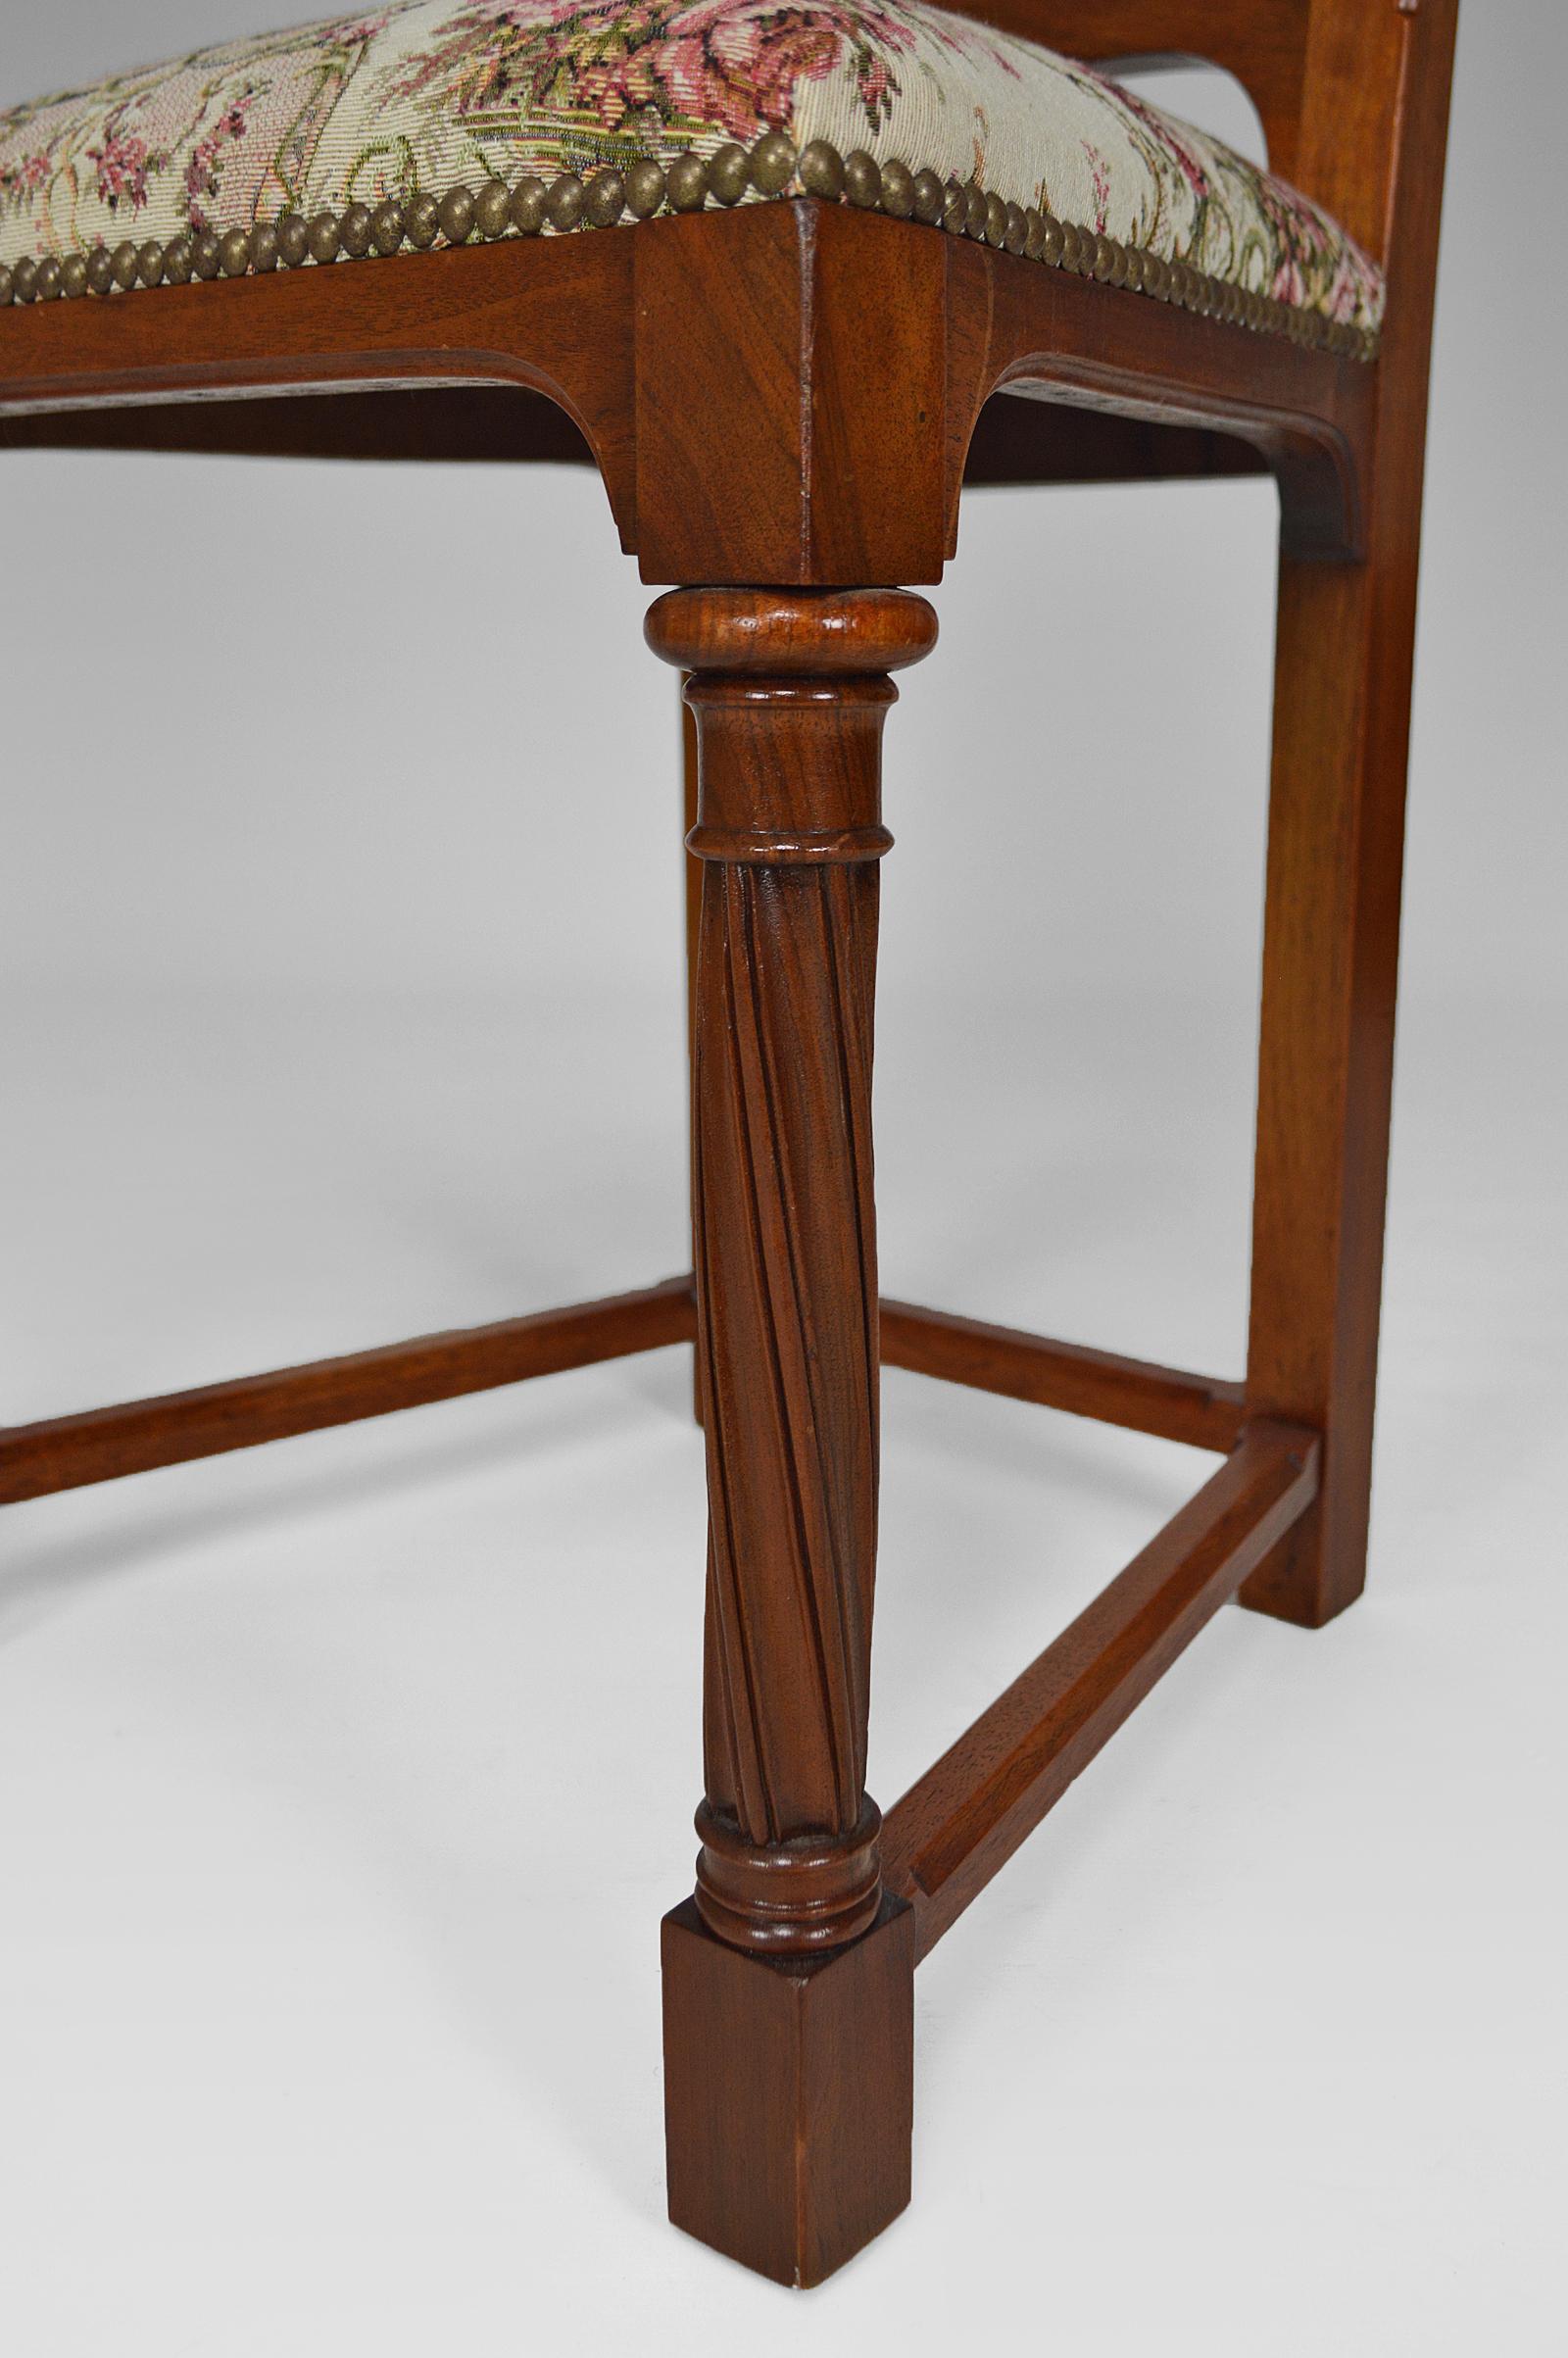 Pair of Antique Victorian Gothic Revival Chairs in Carved Walnut, 19th Century For Sale 11